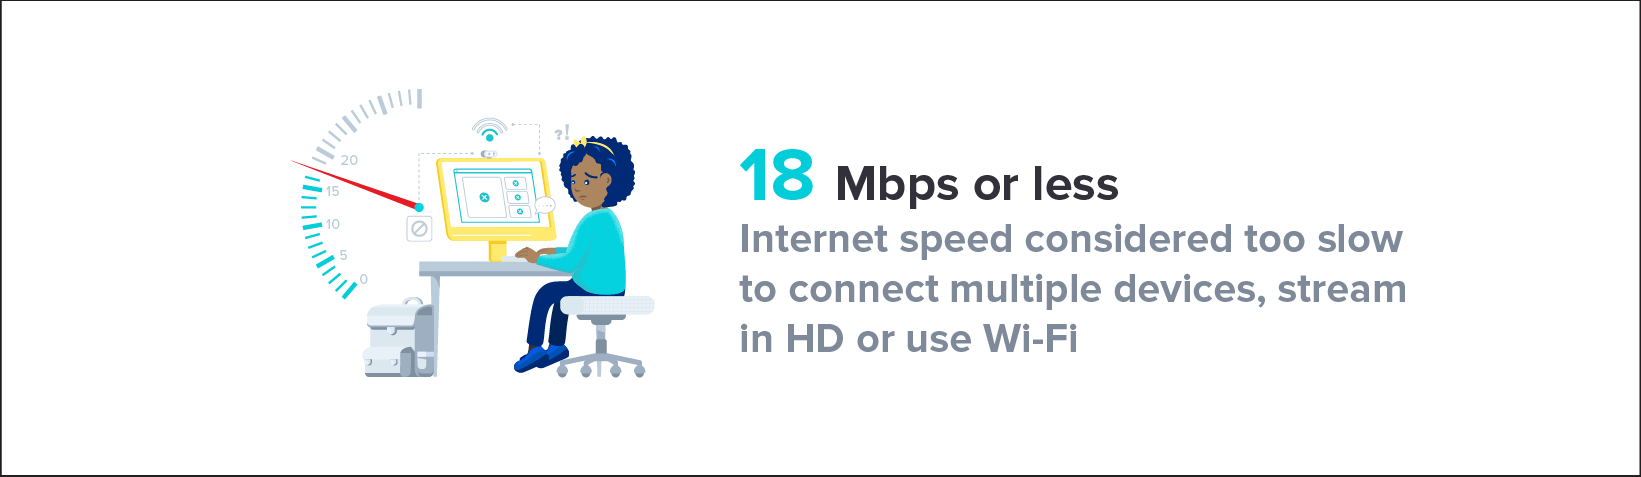 What internet speeds are considered to slow? Under 18mbps